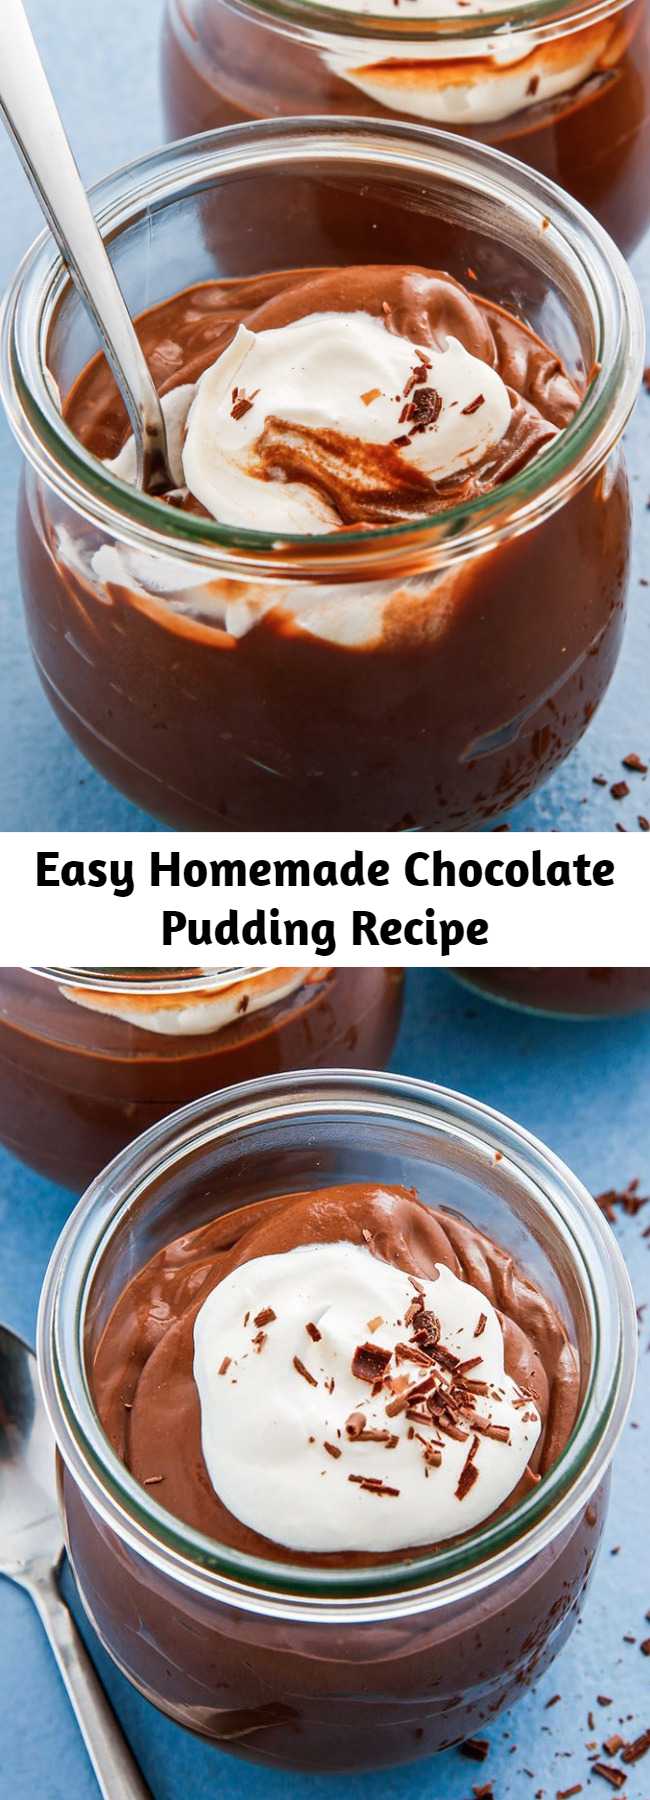 Easy Homemade Chocolate Pudding Recipe - Whip up some Homemade Chocolate Pudding and never look back to those plastic cups again. With little effort you'll have a smooth, creamy, and rich pudding. It's the perfect make ahead dessert for dinner guests or just to have in your fridge on a Wednesday night.